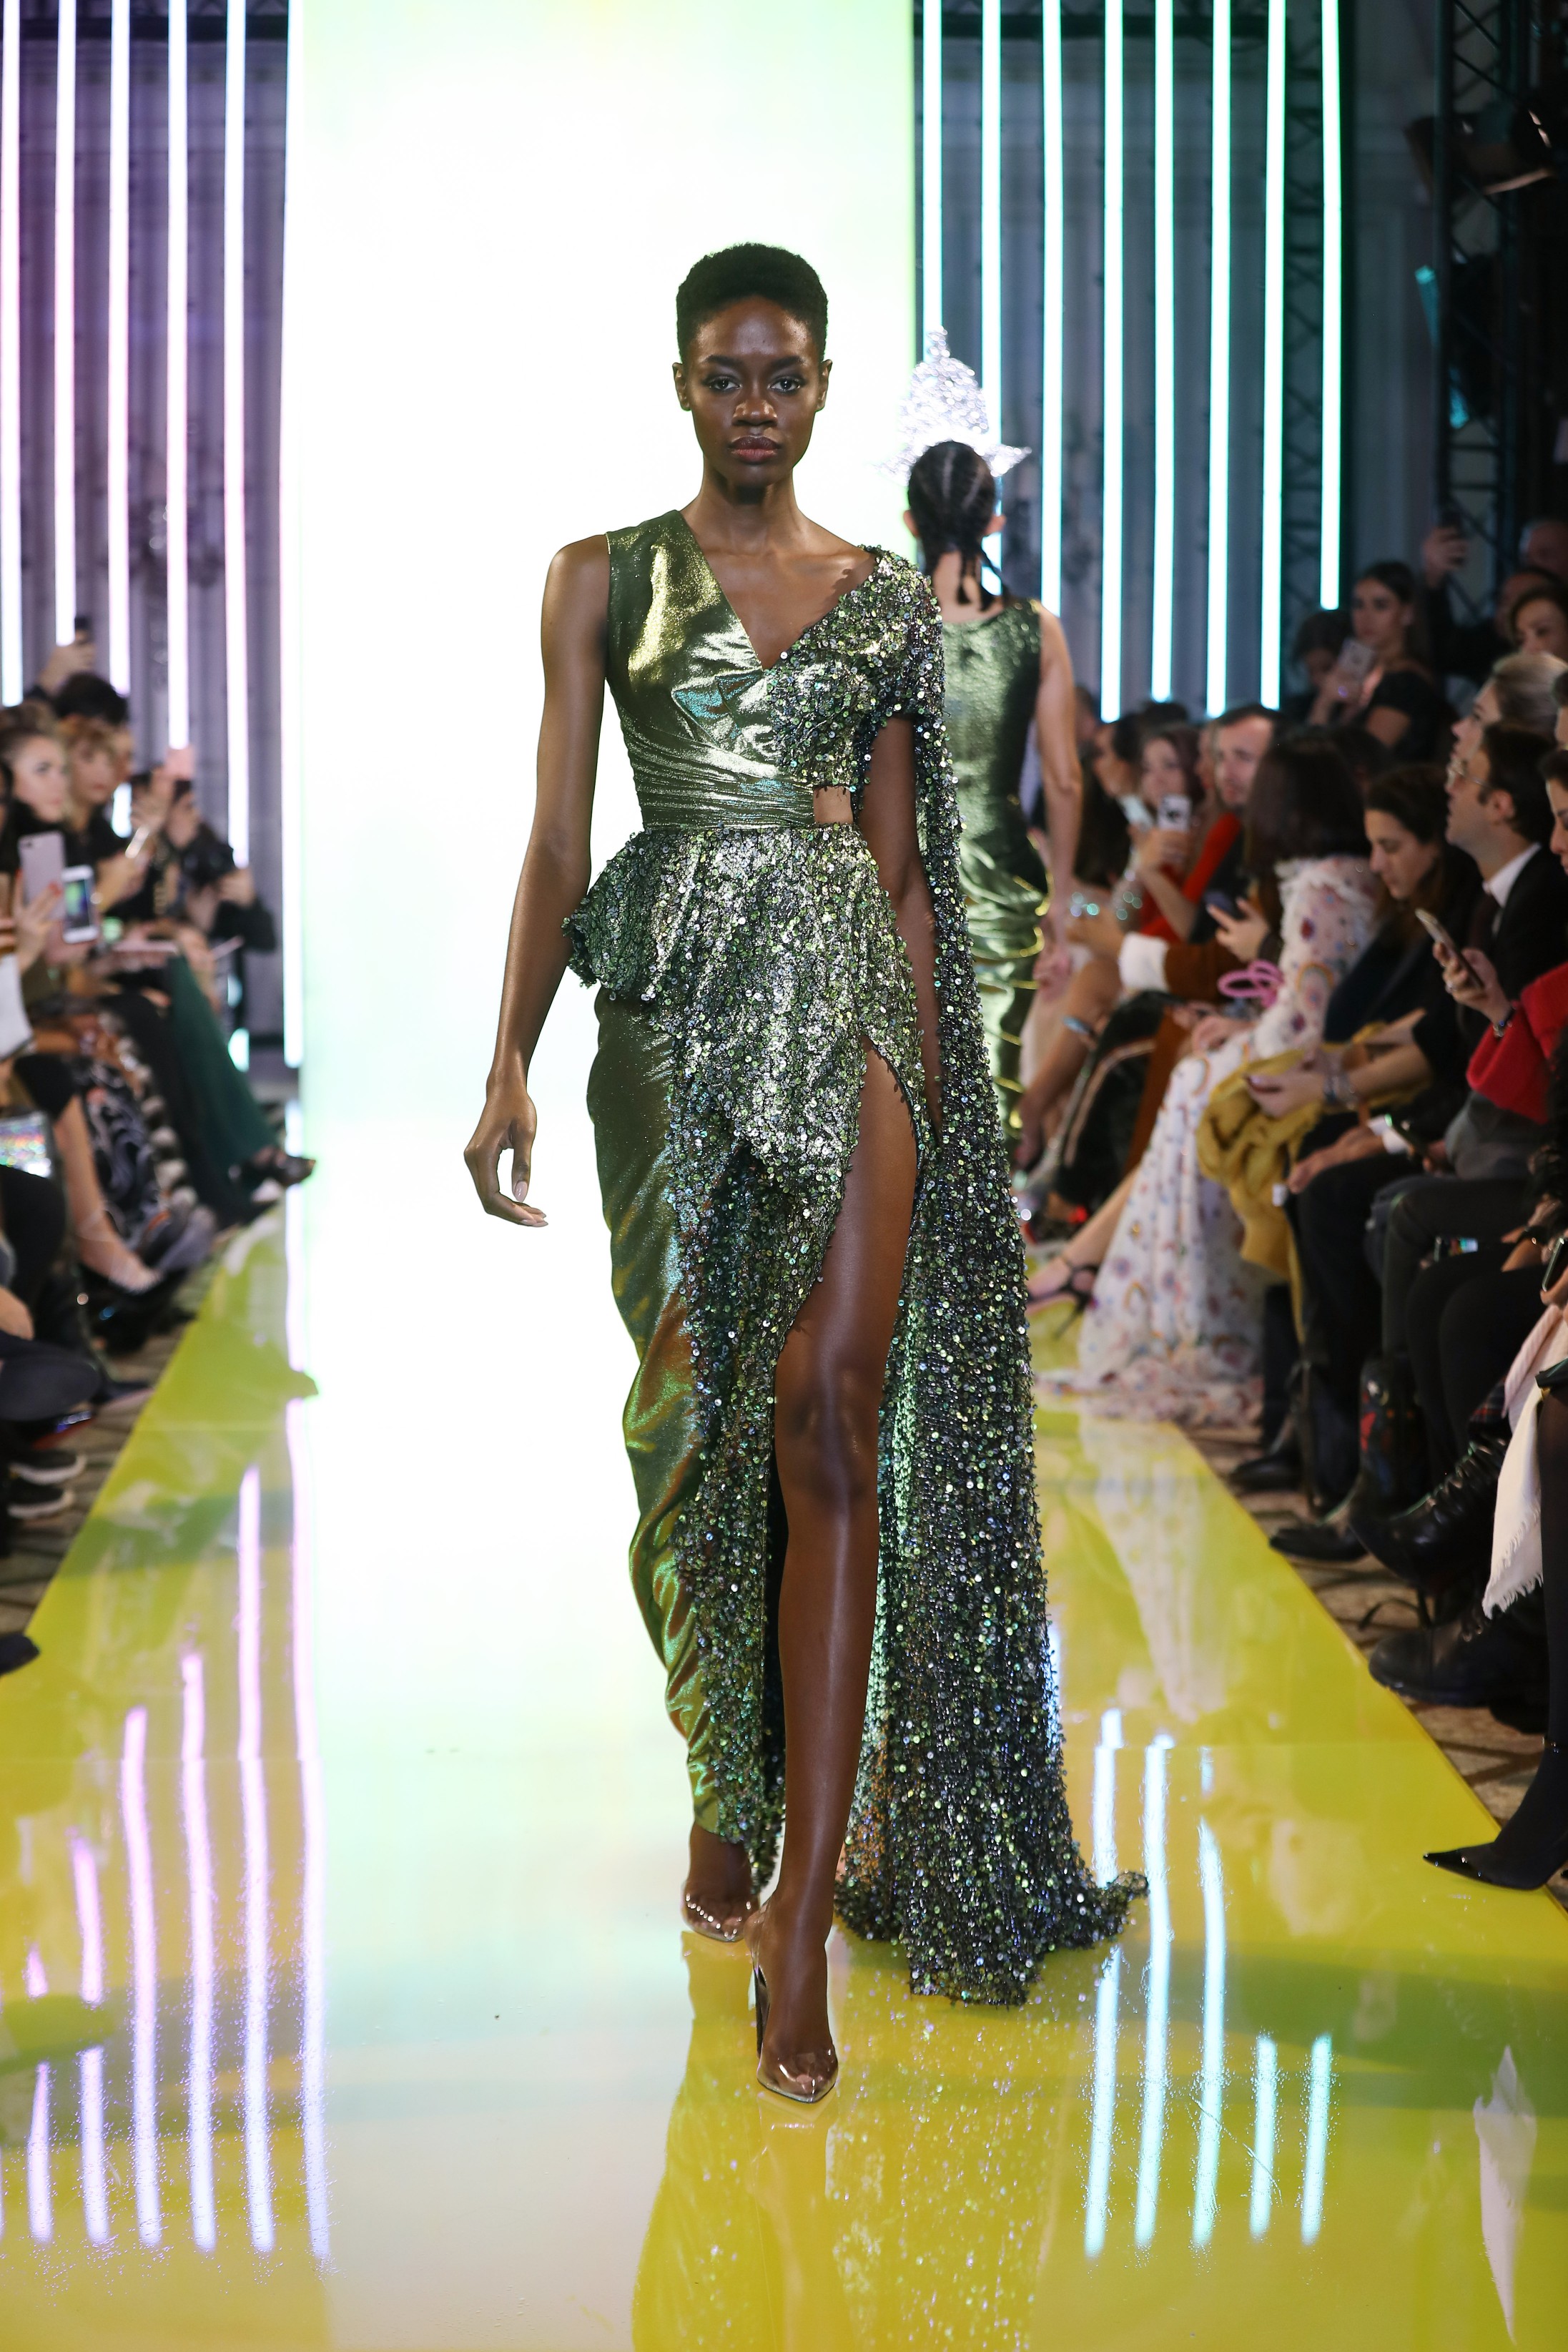 SS19-30- Olive Green Asymmetric Dress Featuring Threads And Sequins Embellishements And A Side Slit .jpg